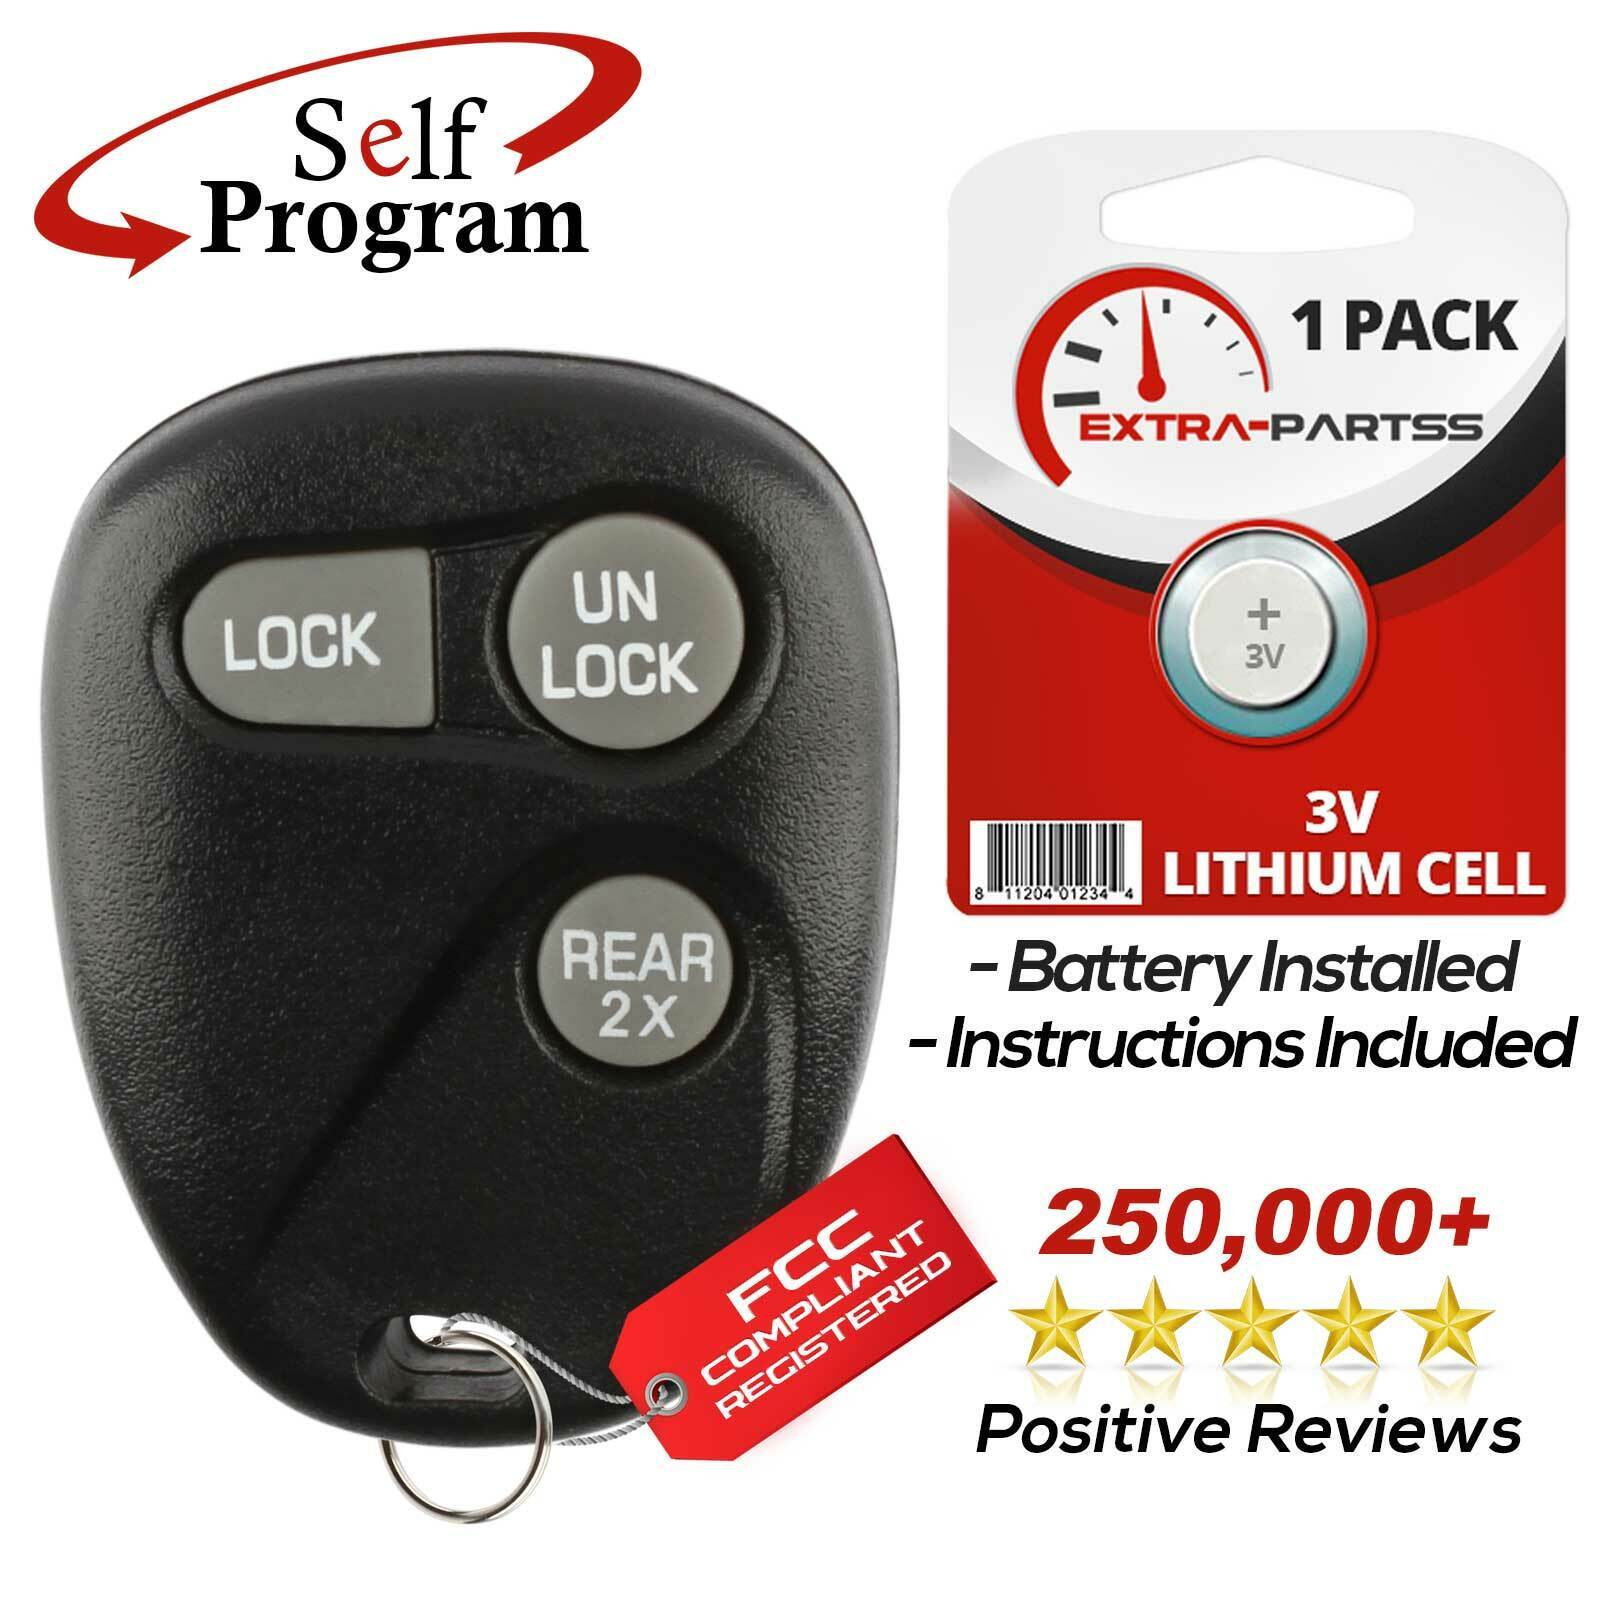 New Replacement Keyless Entry Car Truck Remote Key Fob Van Alarm For 16245100-29